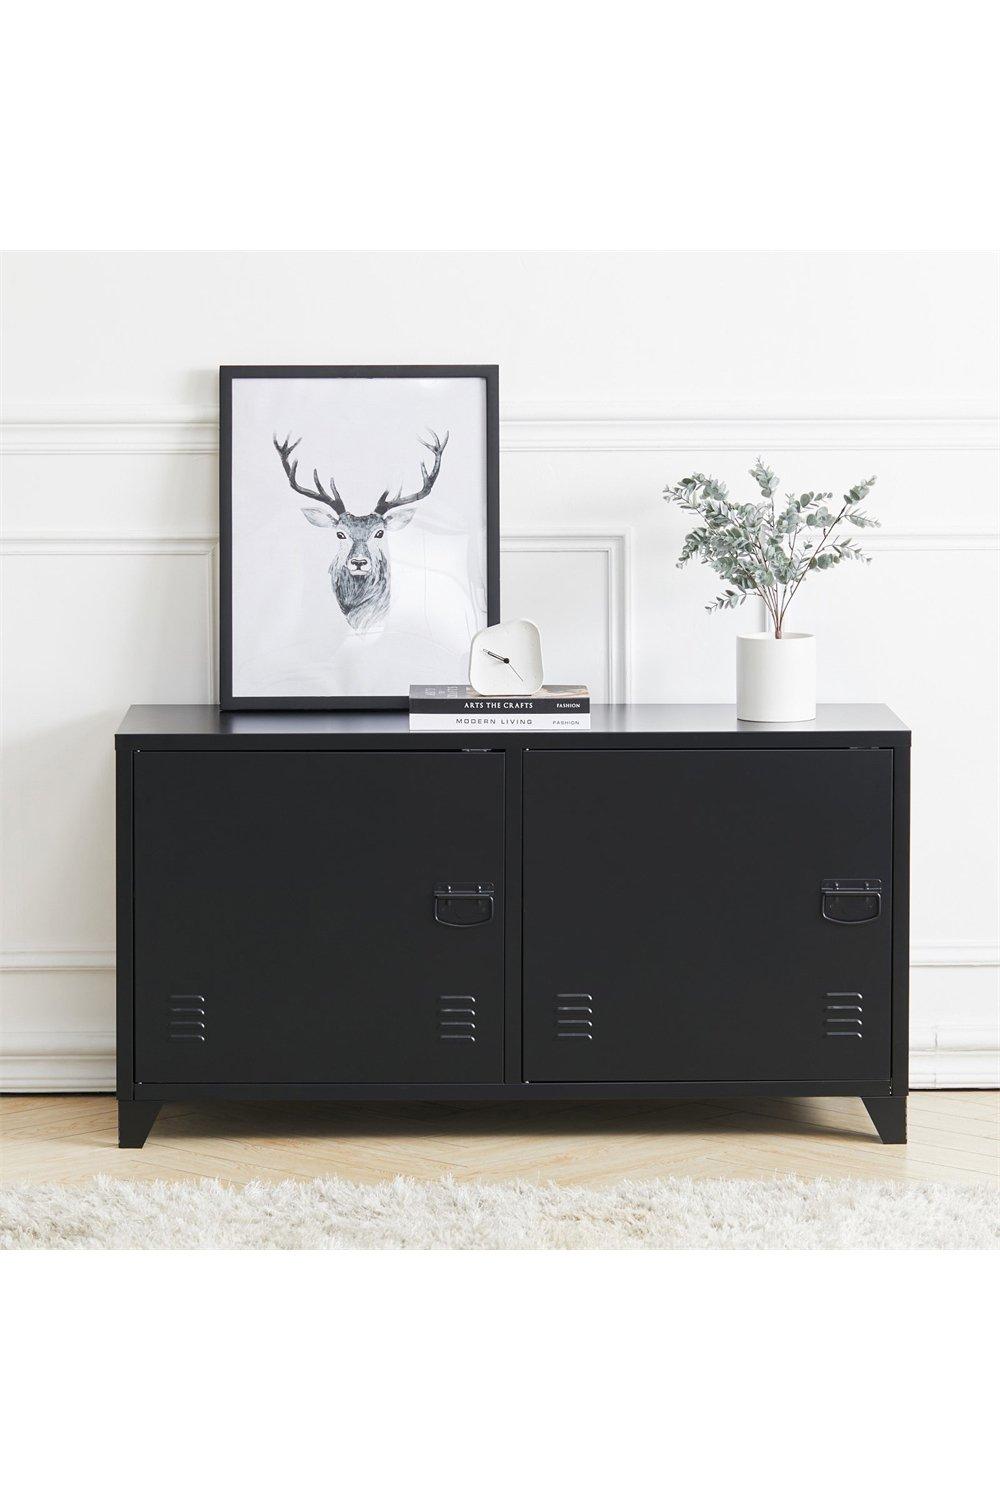 Industrial Style Metal File Cabinet with 2 Doors TV Stand Storage Cabinet